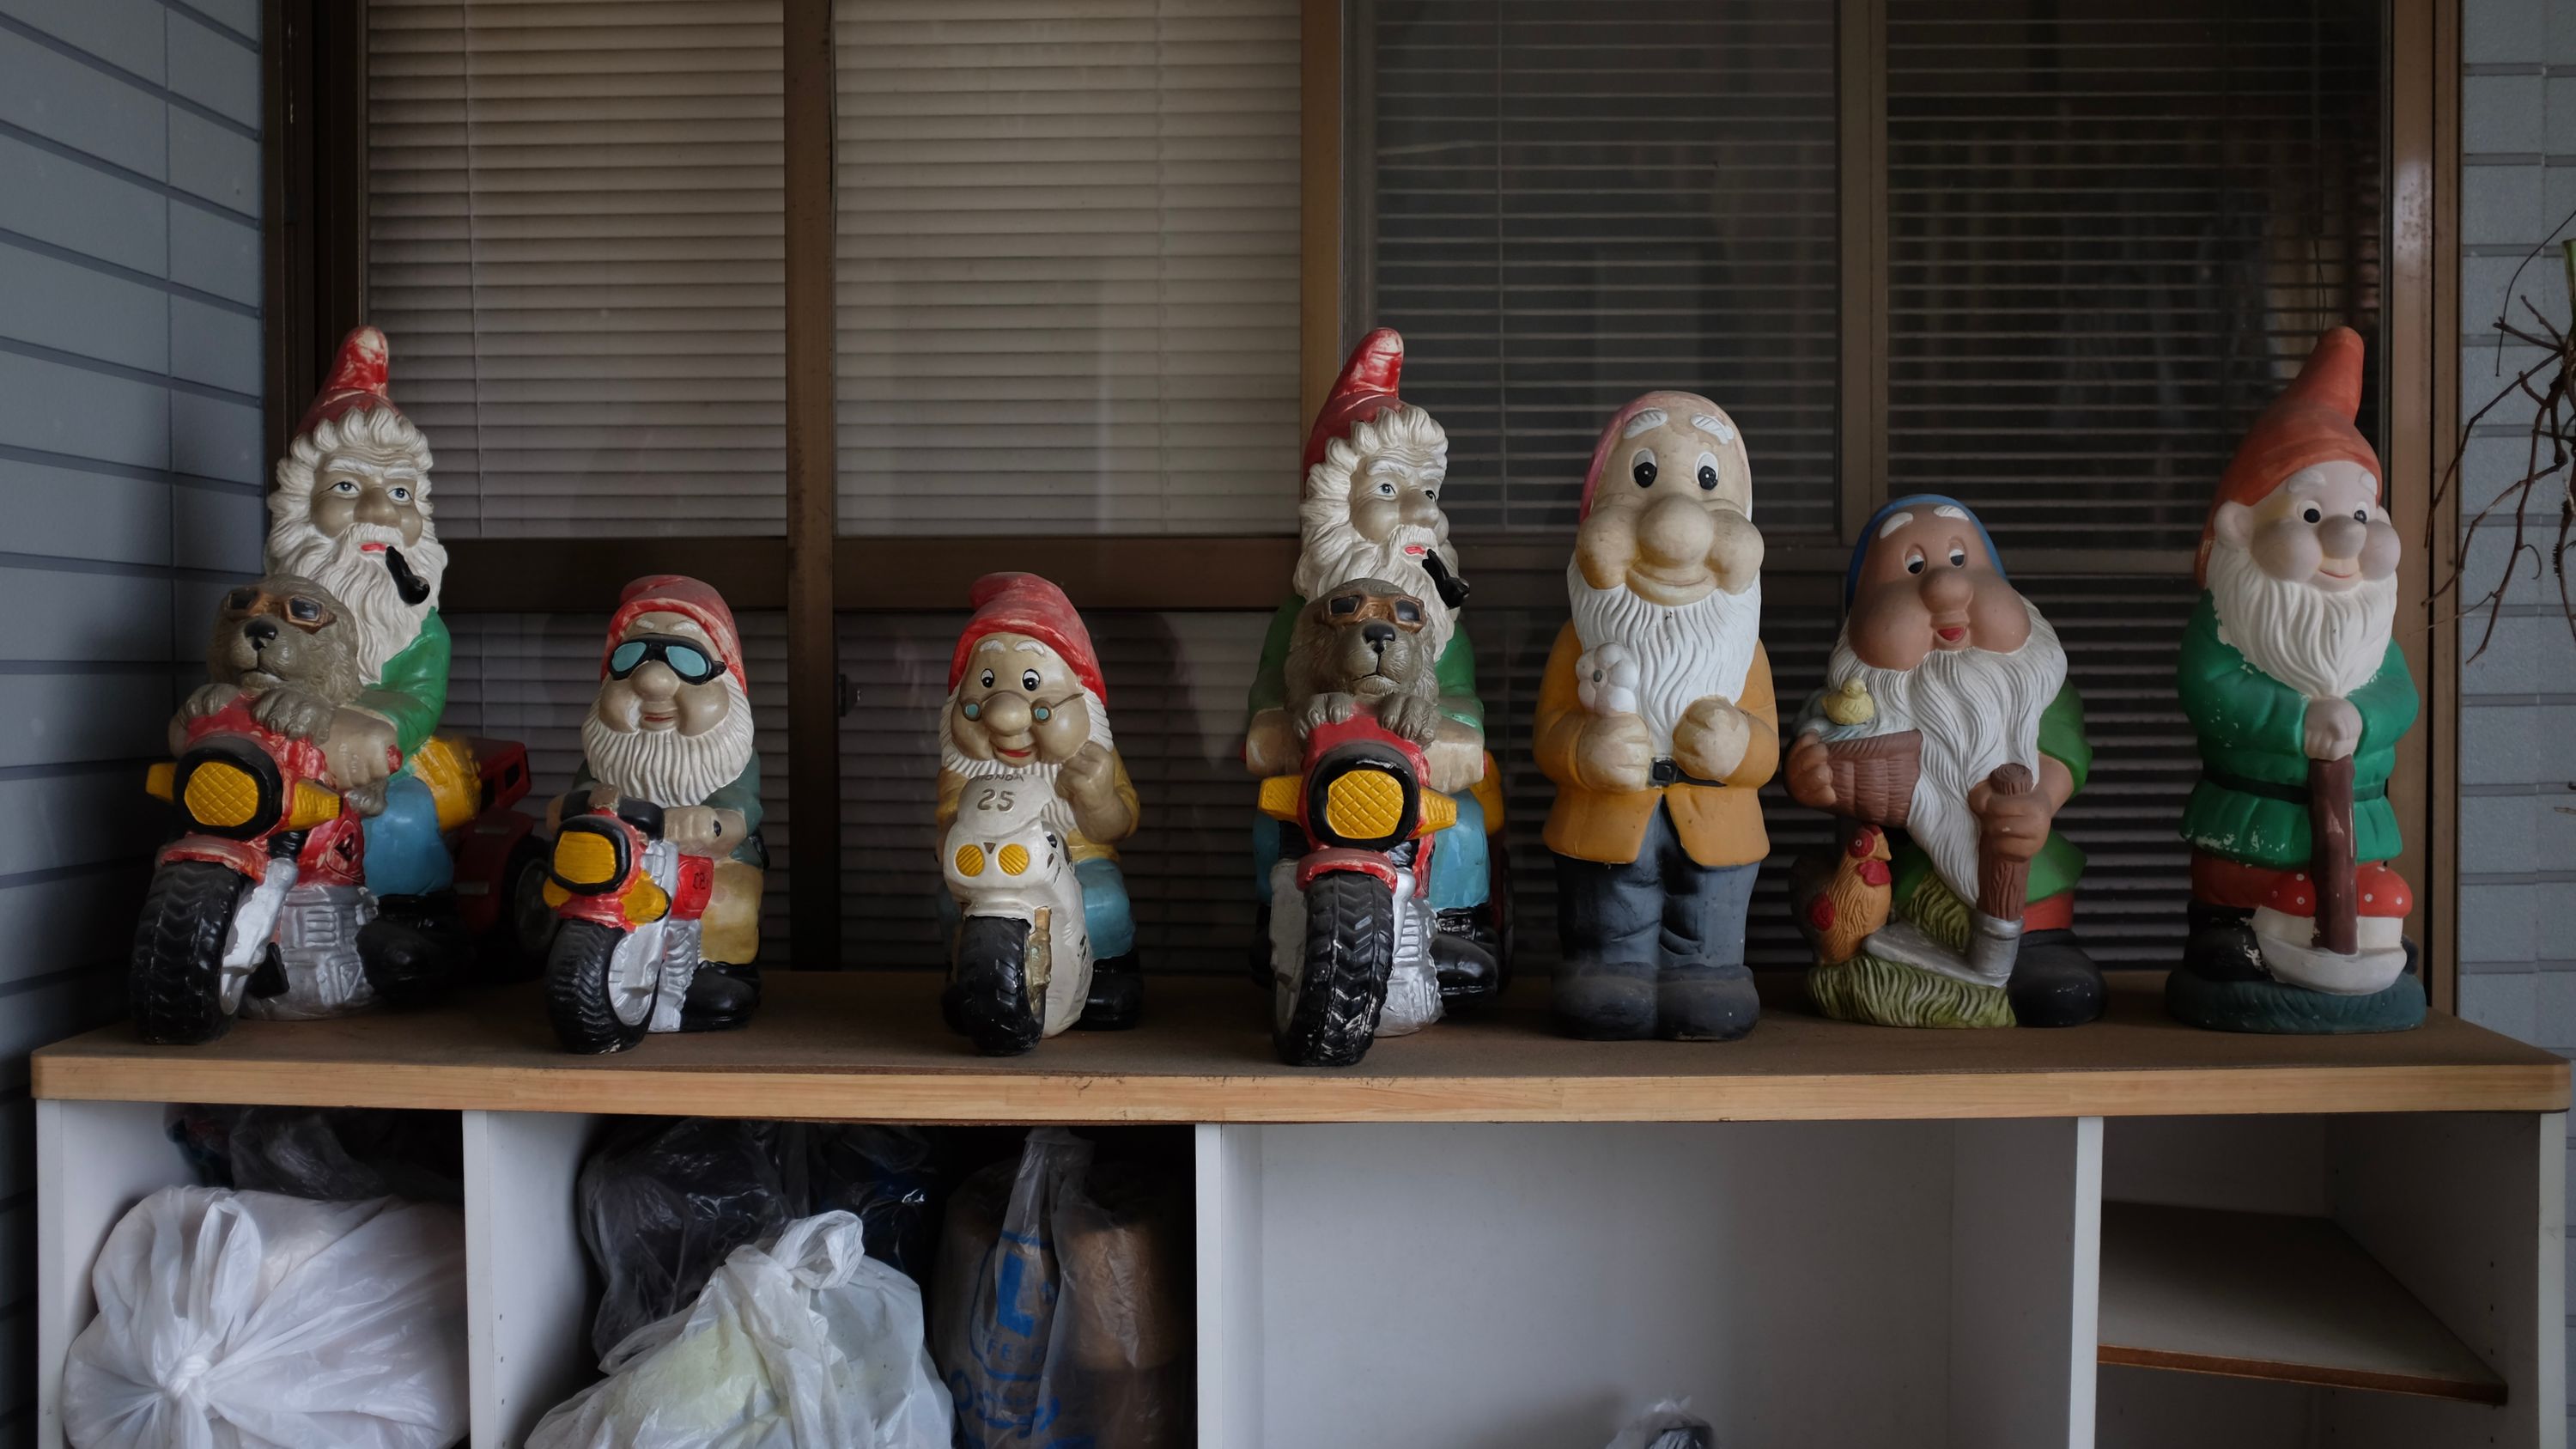 Seven dwarves in Santa hats, four of them riding motorcycles, on a shelf.